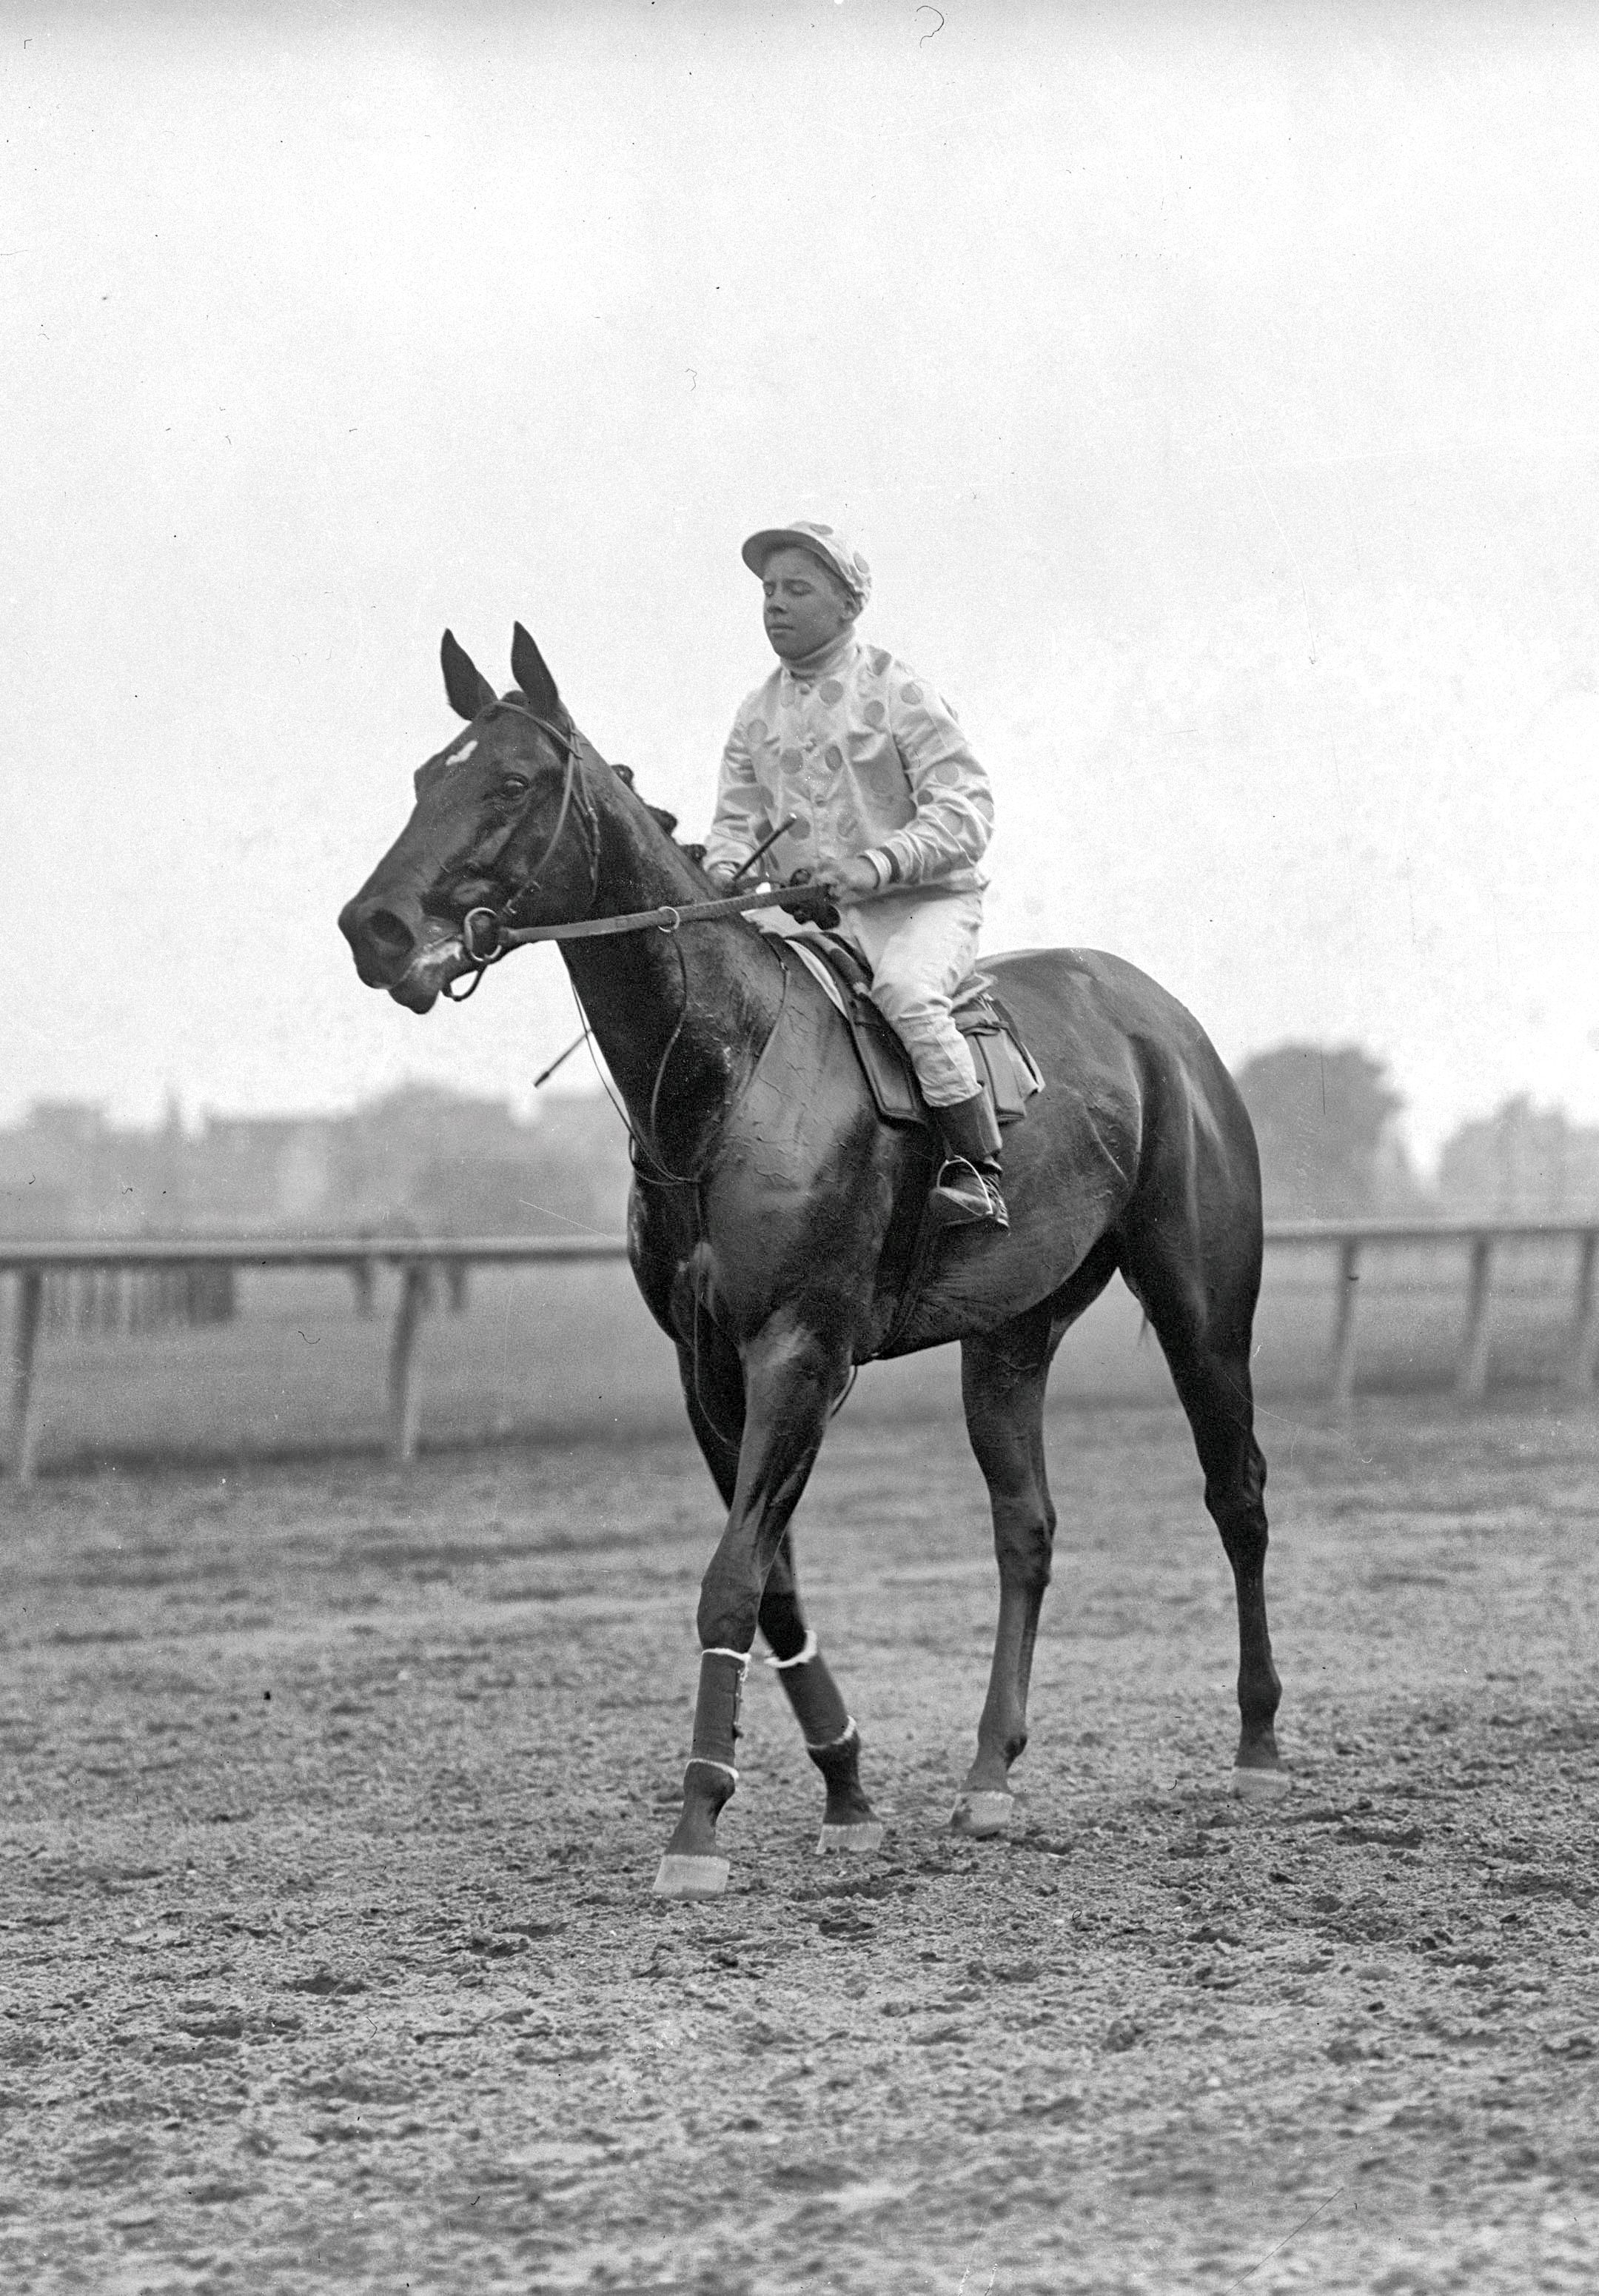 Maskette with Joe Notter up, undated (Keeneland Library Cook Collection)